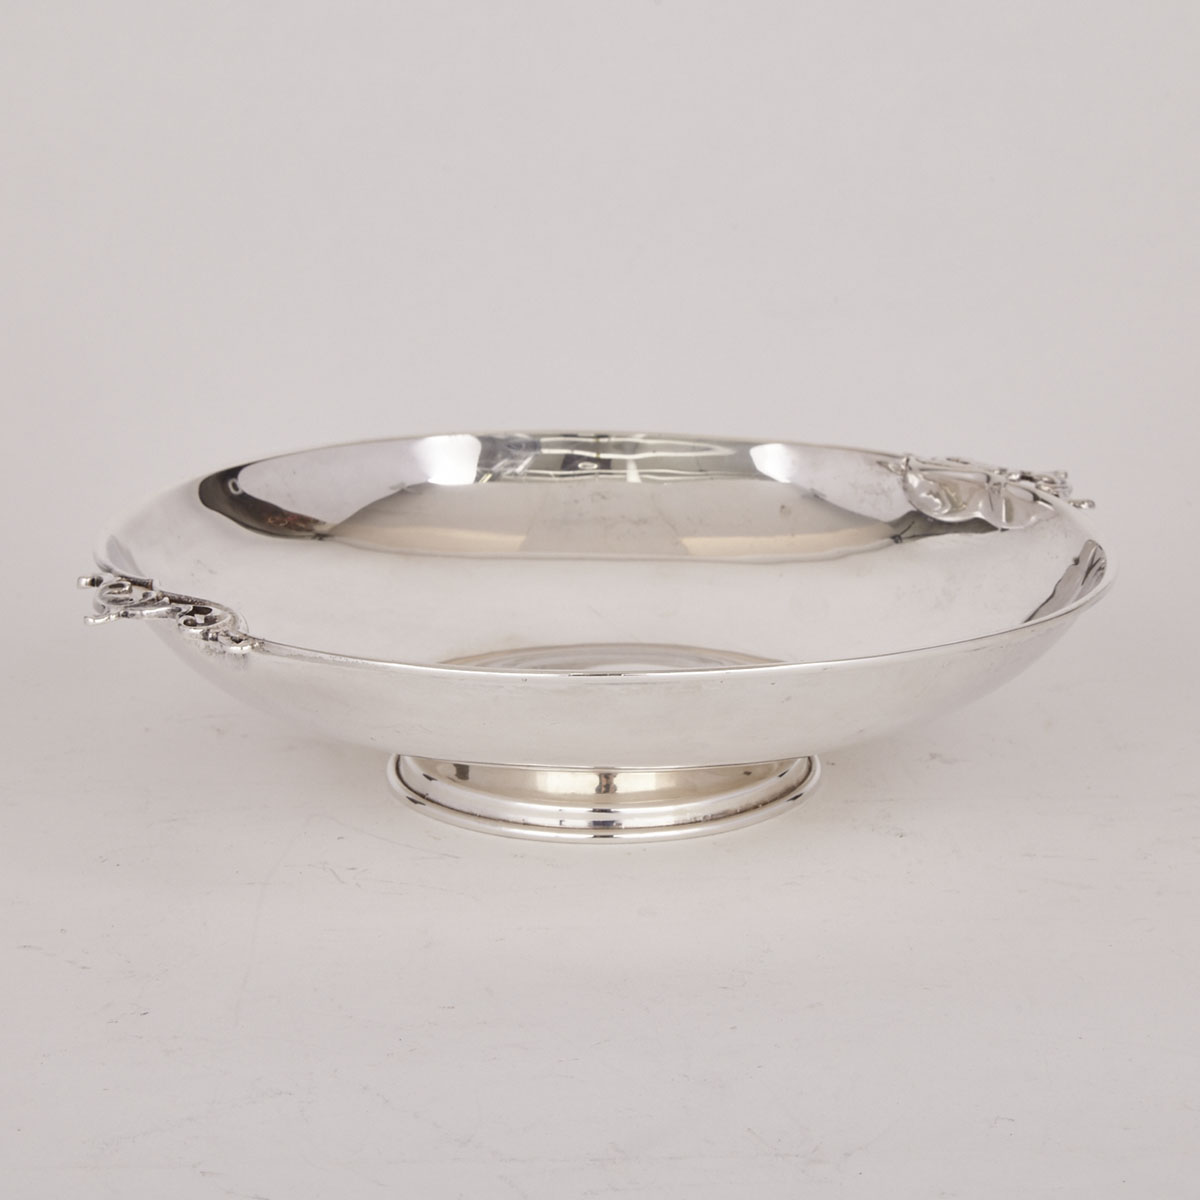 Mexican Silver Two-Handled Shallow Circular Bowl, R. Rodriguez, 20th century